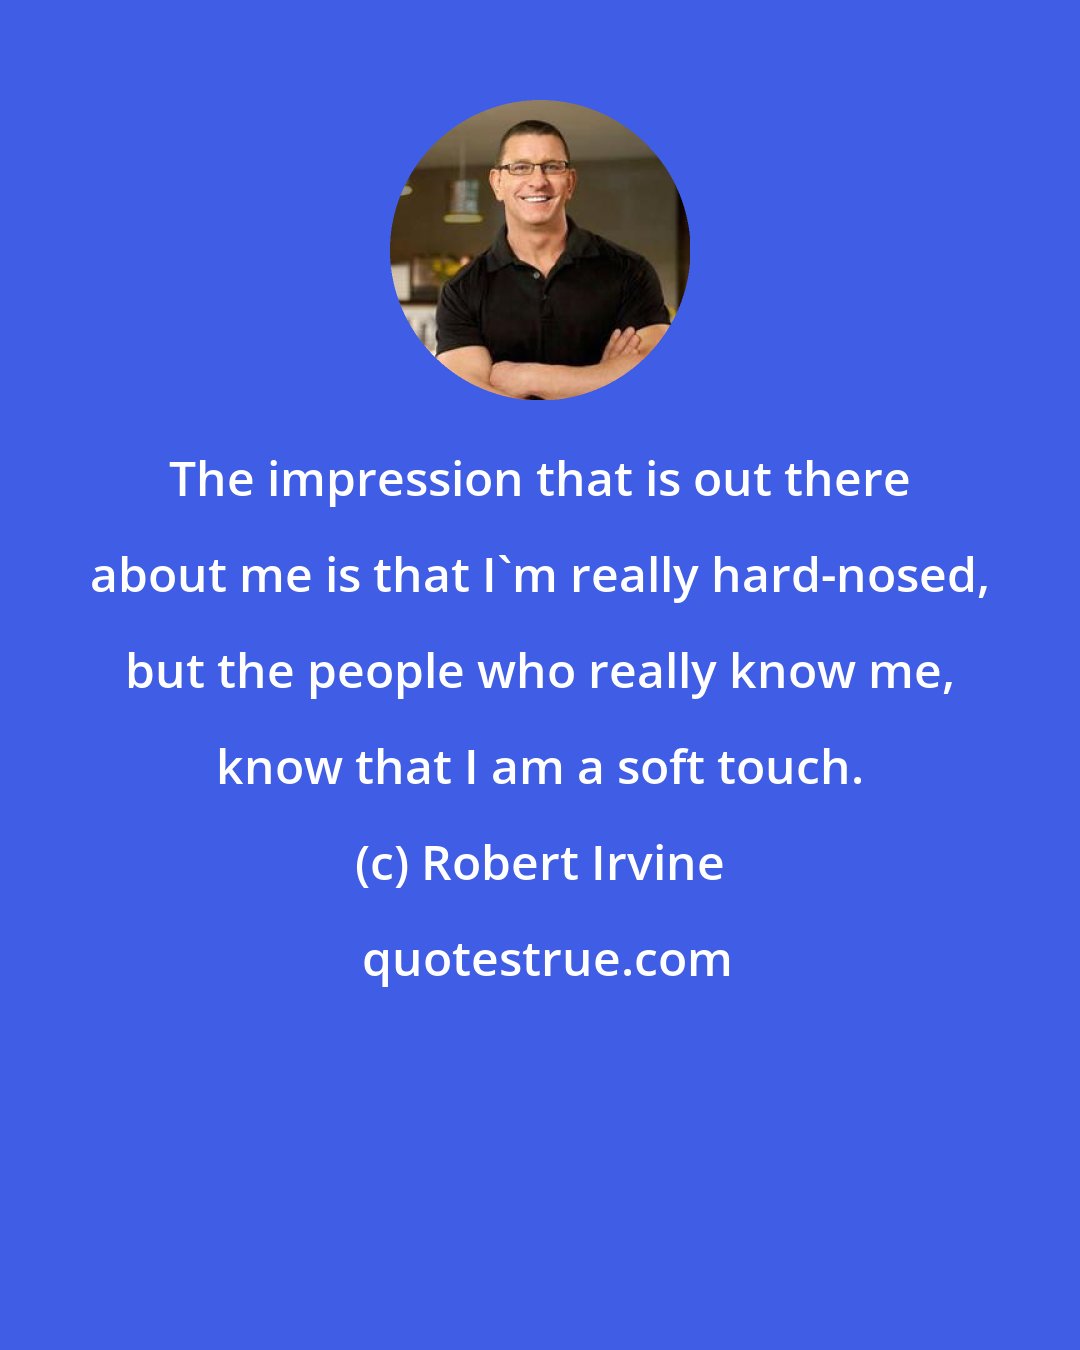 Robert Irvine: The impression that is out there about me is that I'm really hard-nosed, but the people who really know me, know that I am a soft touch.